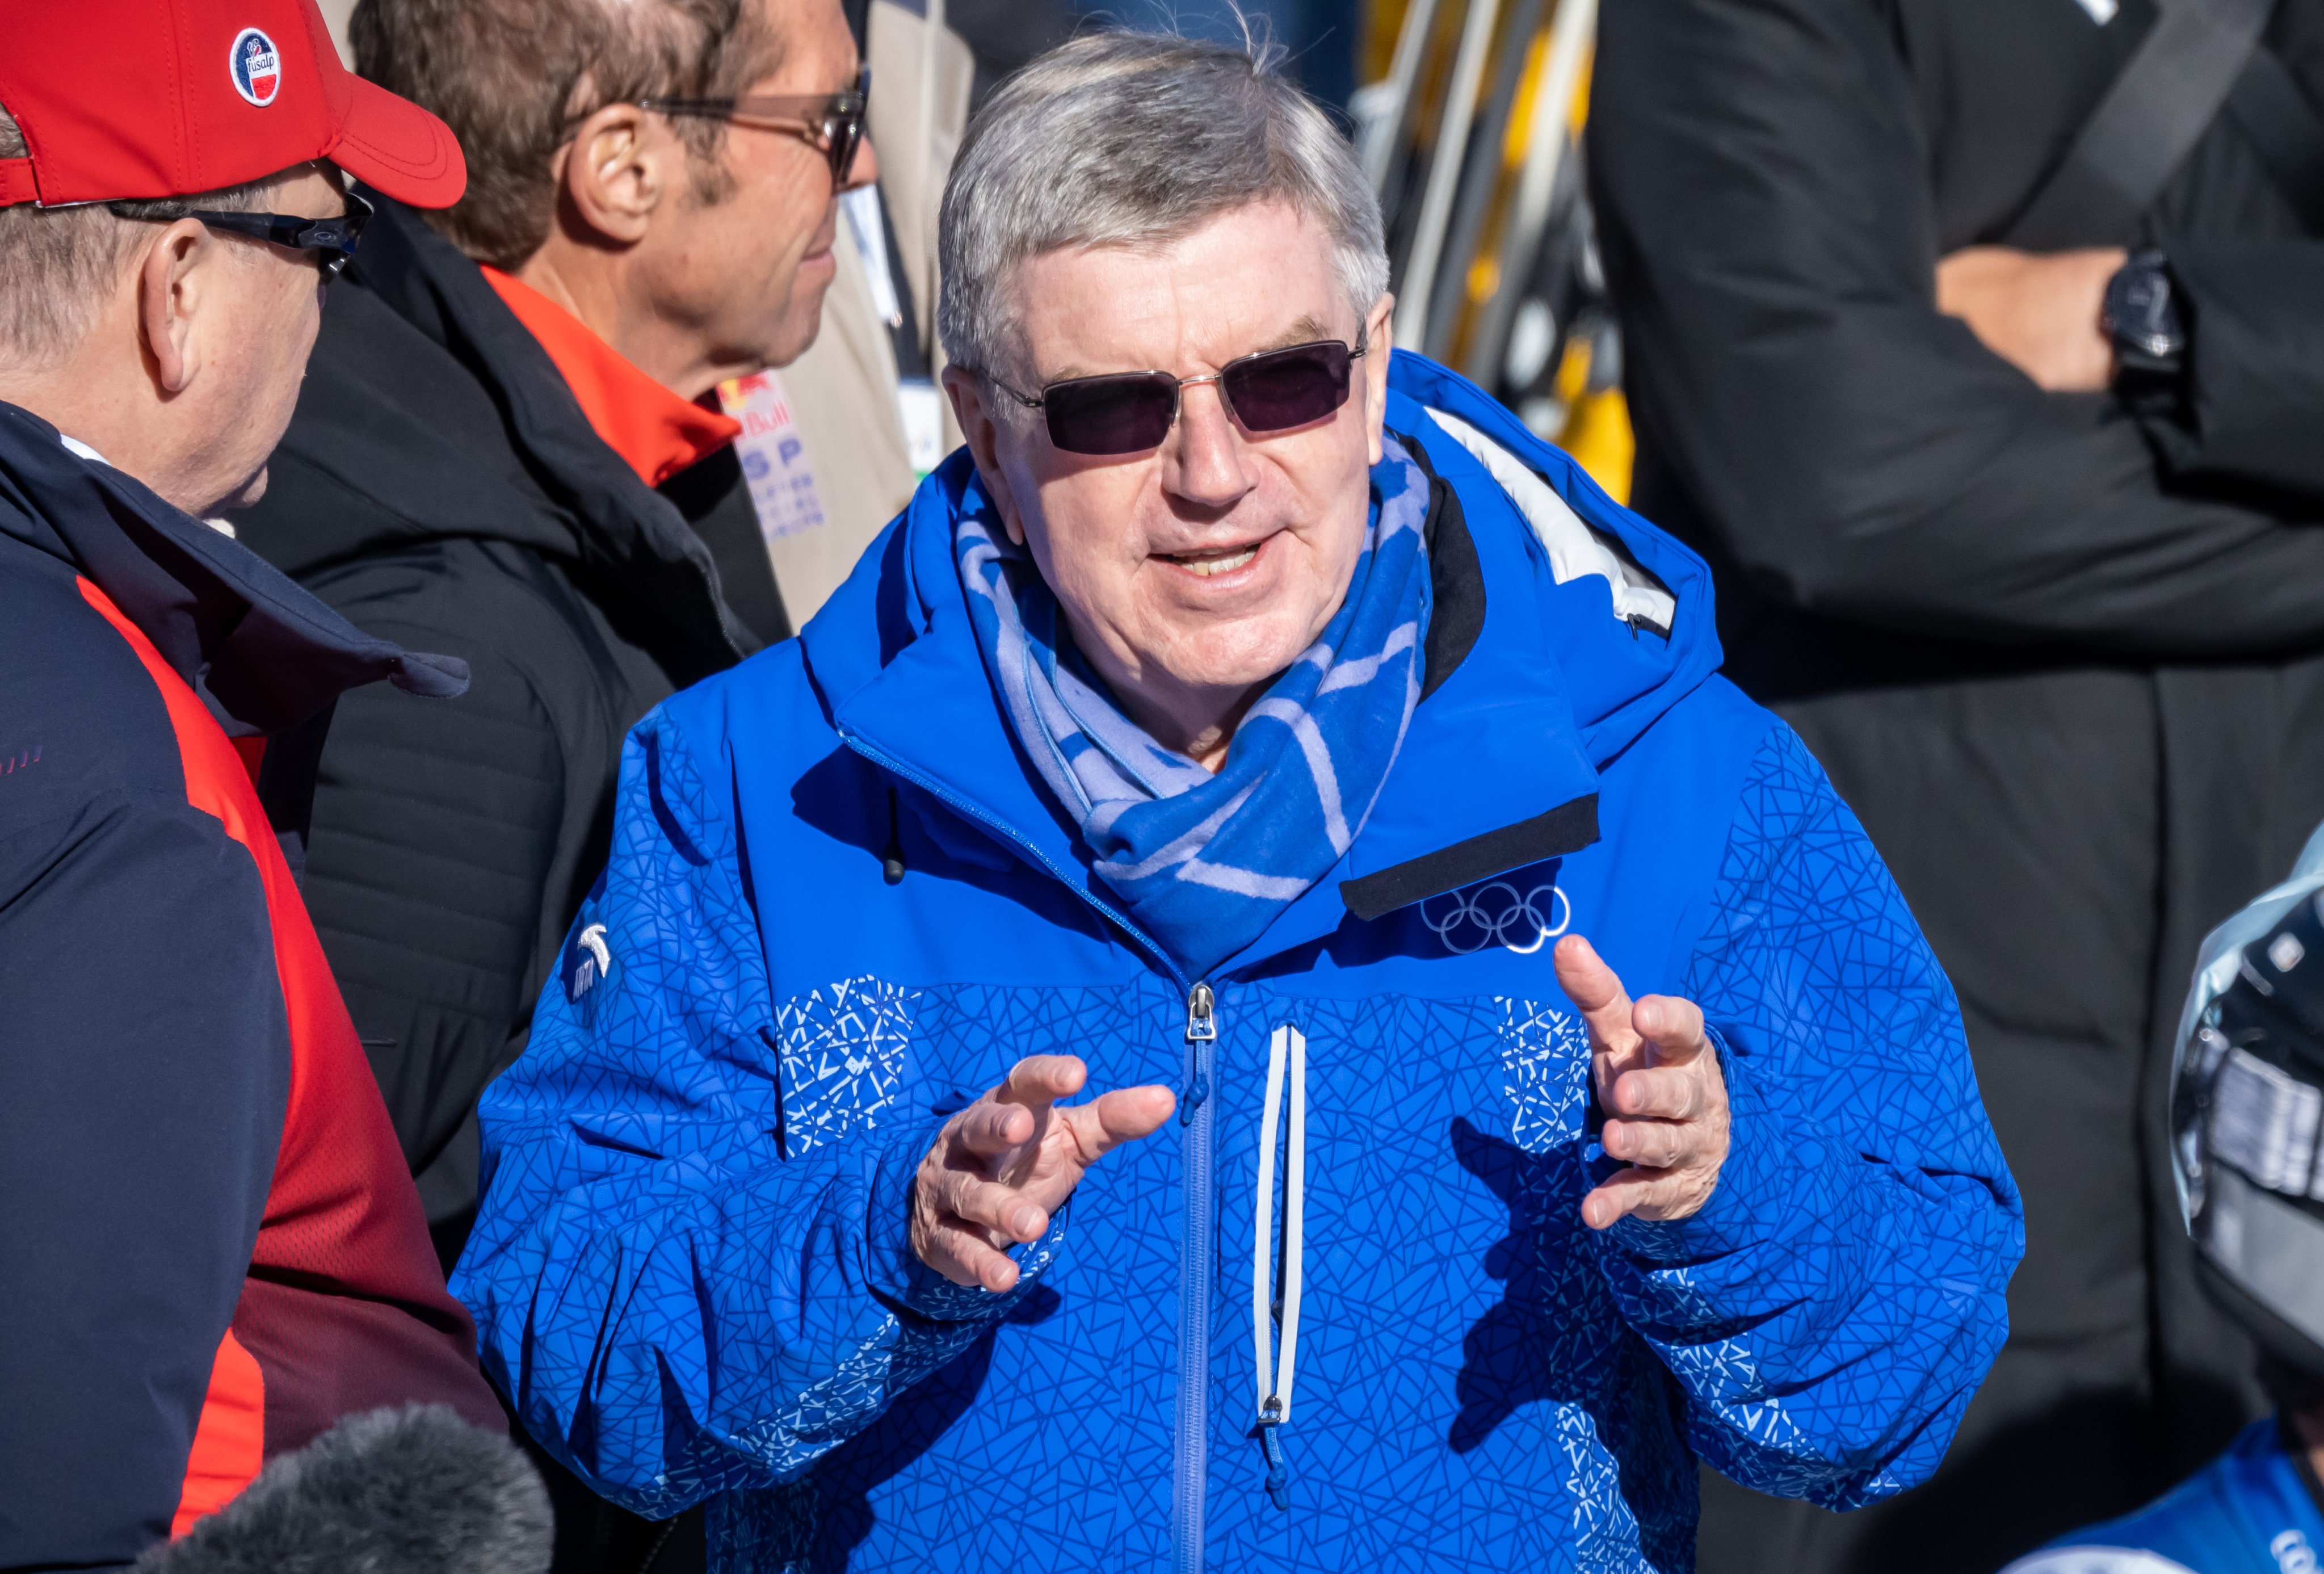 International Olympic Committee president Thomas Bach has claimed he is doing most for peace by allowing Russian athletes to compete. Photo: DPA